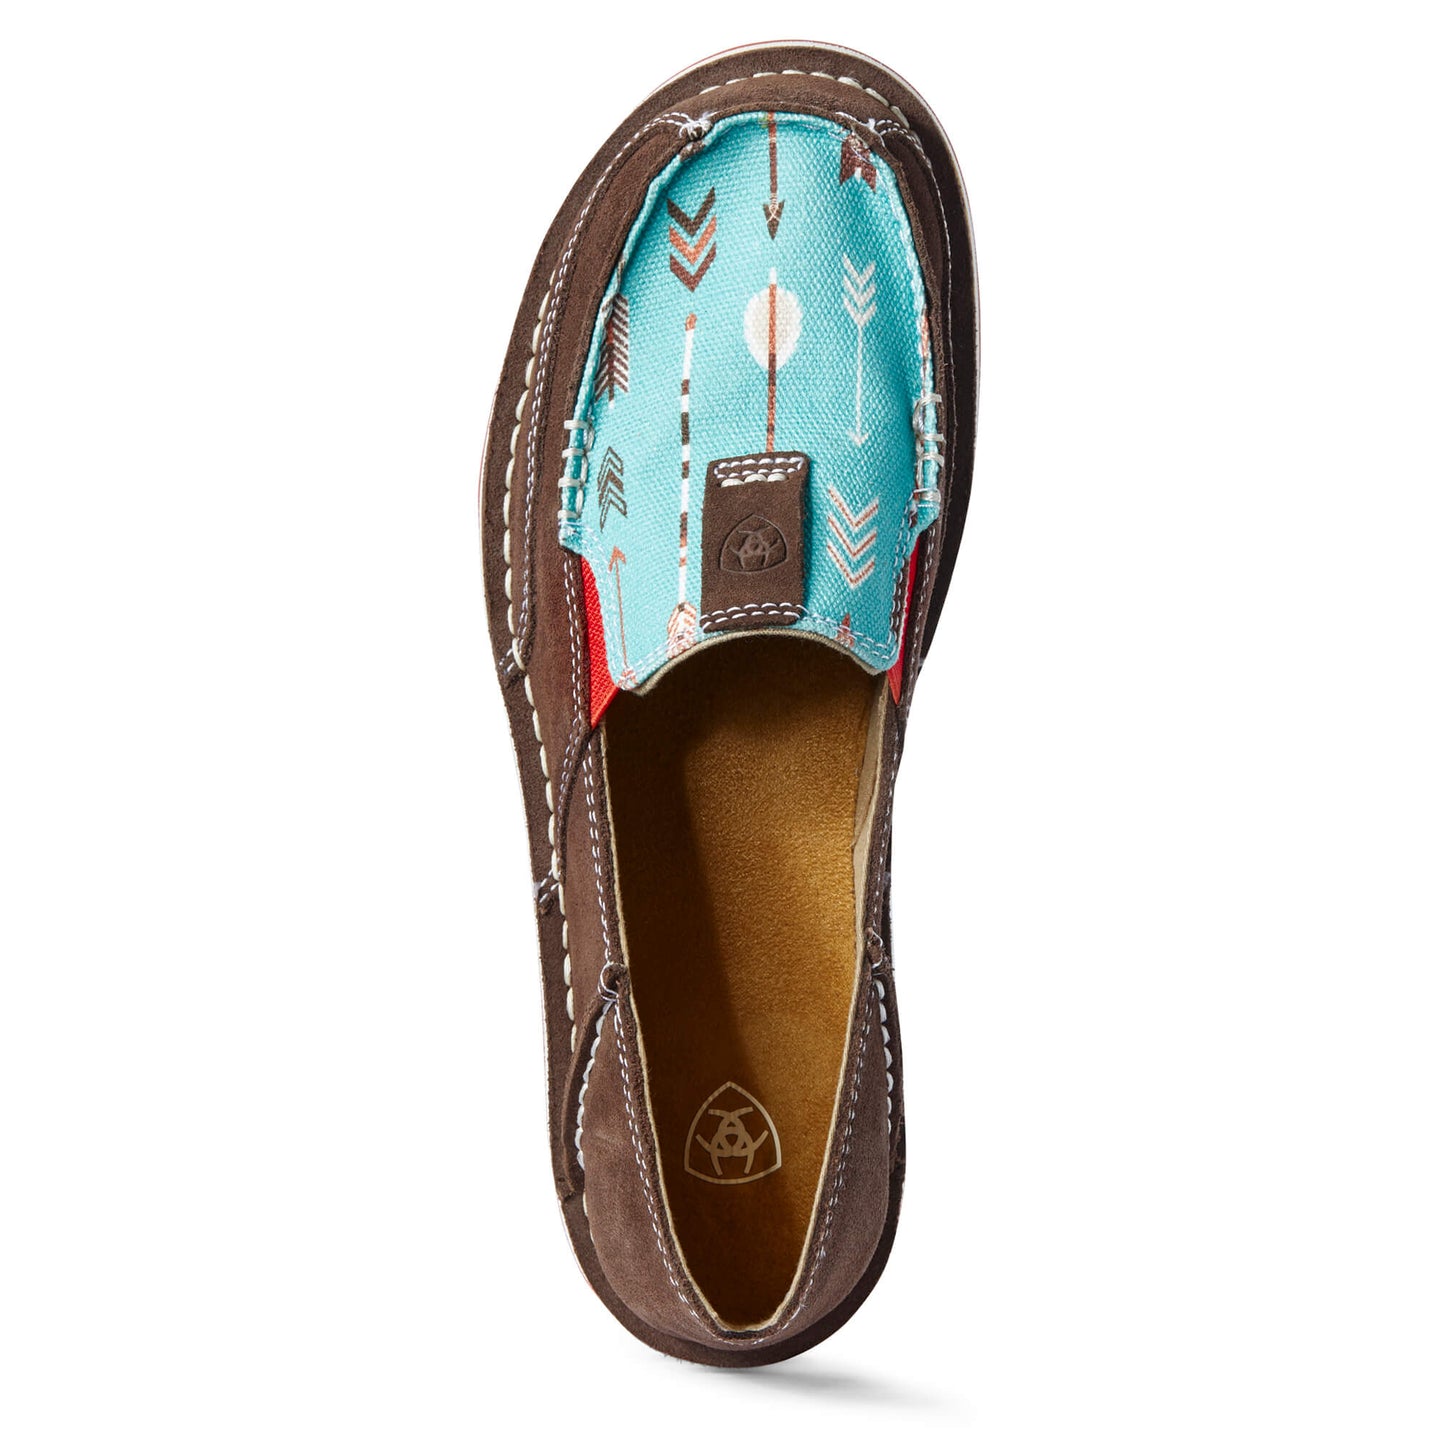 Ariat Women's Turquoise Arrows & Chocolate Suede Cruisers